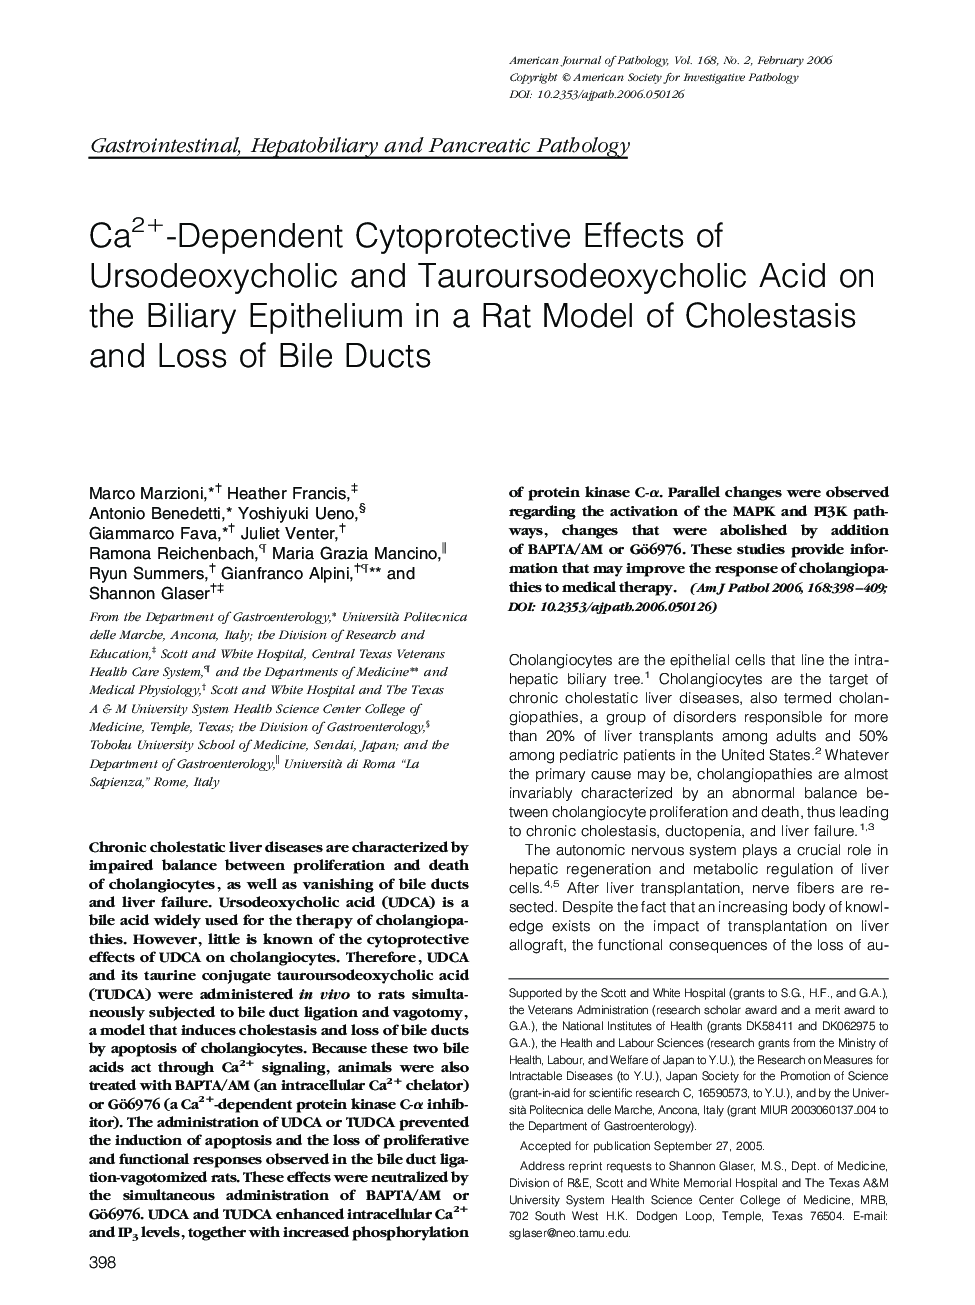 Ca2+-Dependent Cytoprotective Effects of Ursodeoxycholic and Tauroursodeoxycholic Acid on the Biliary Epithelium in a Rat Model of Cholestasis and Loss of Bile Ducts